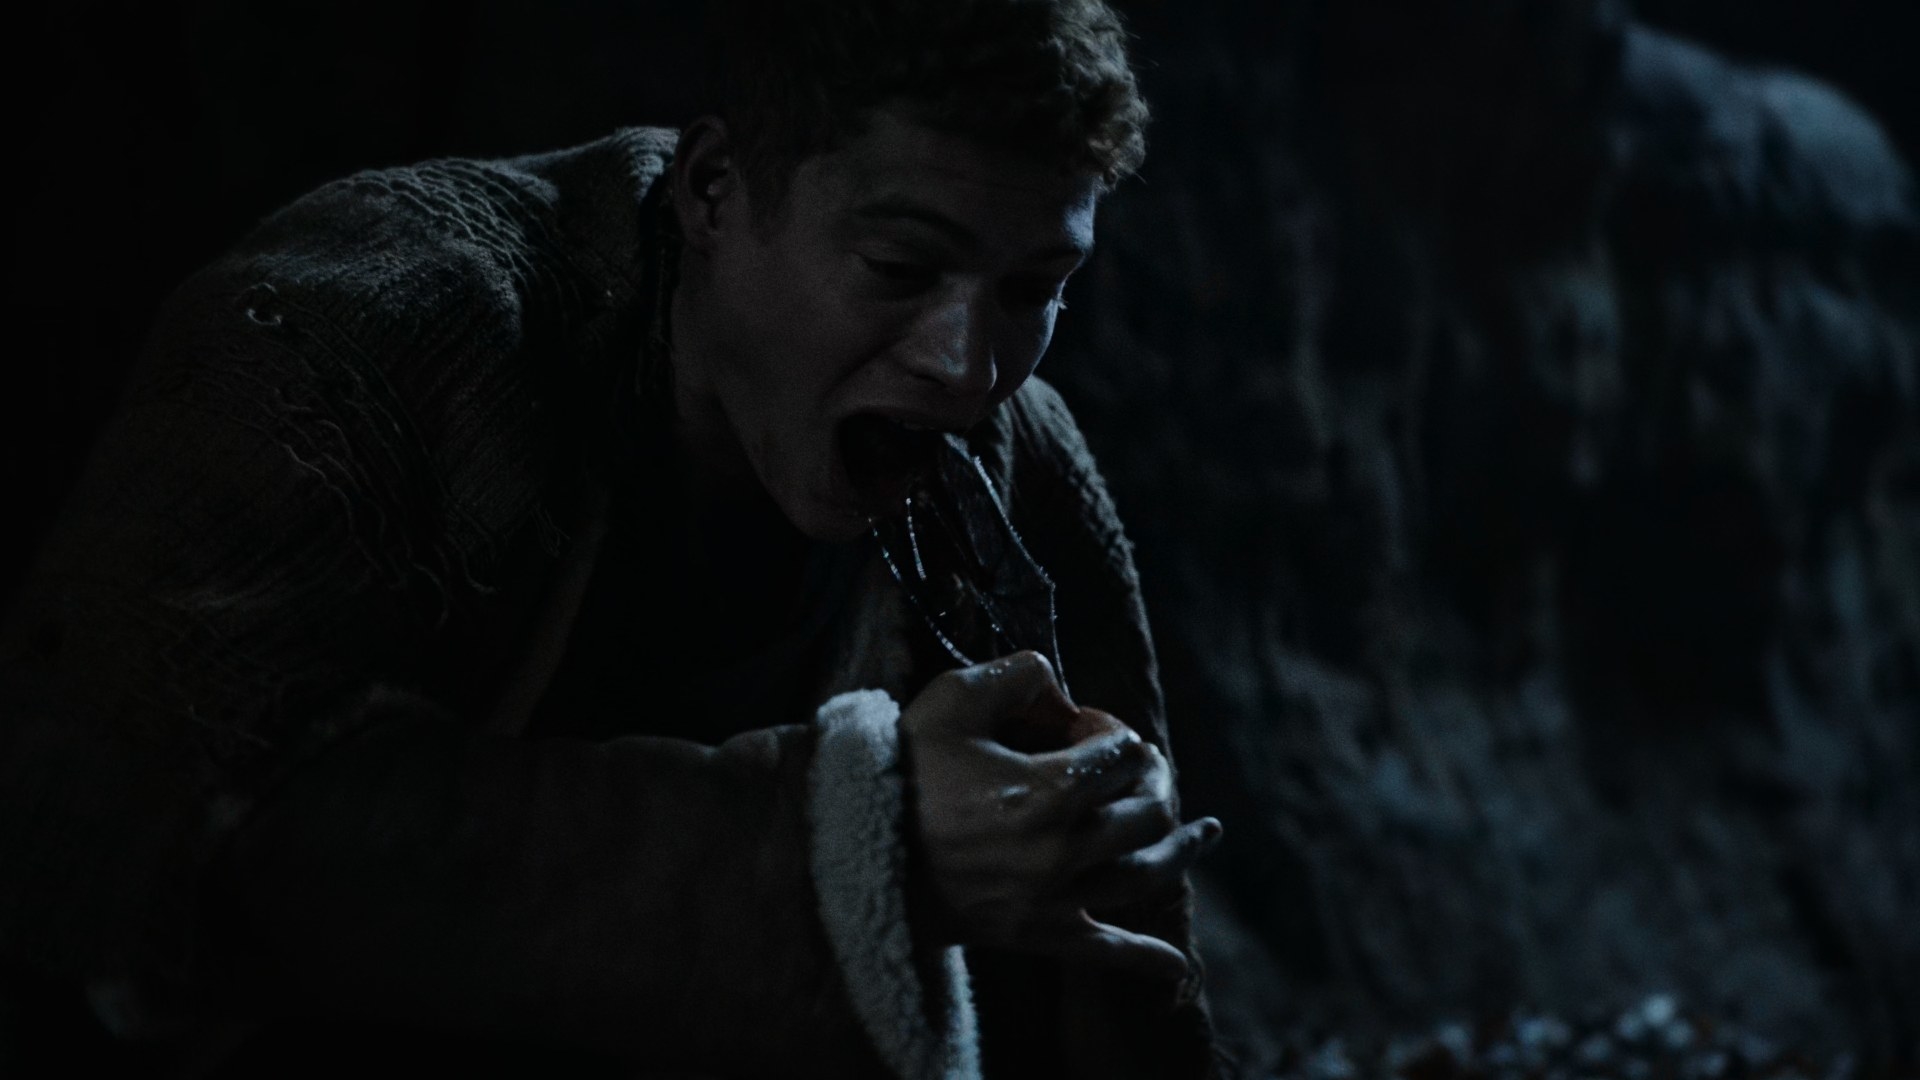 A medium shot of Rand at night outdoors, pulling a large dead bat out of his mouth, gagging as he does so